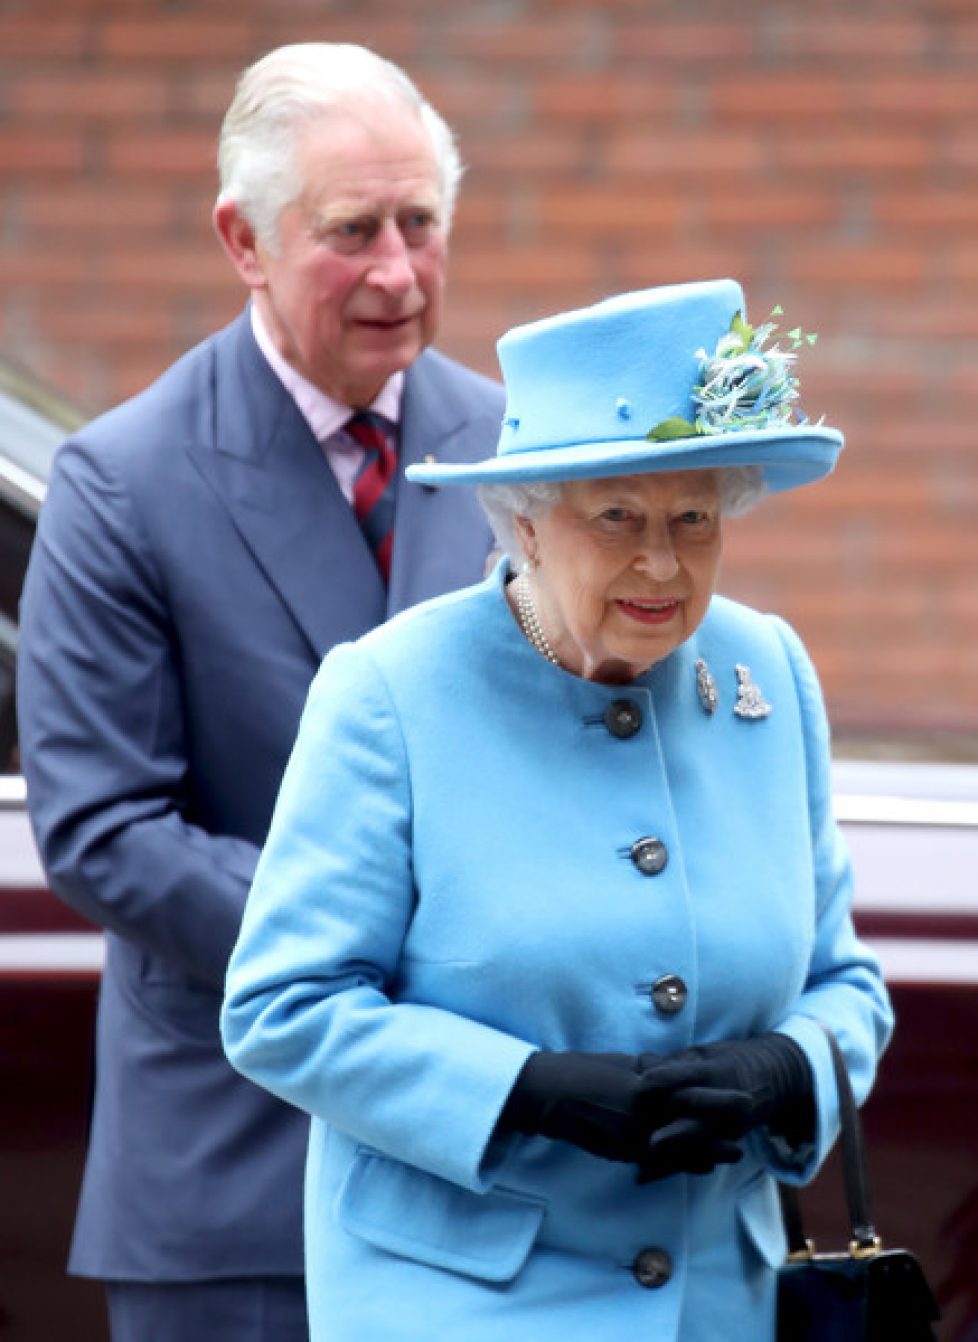 Queen+Prince+Wales+Visit+Household+Cavalry+XFDnBfHBs0Jl